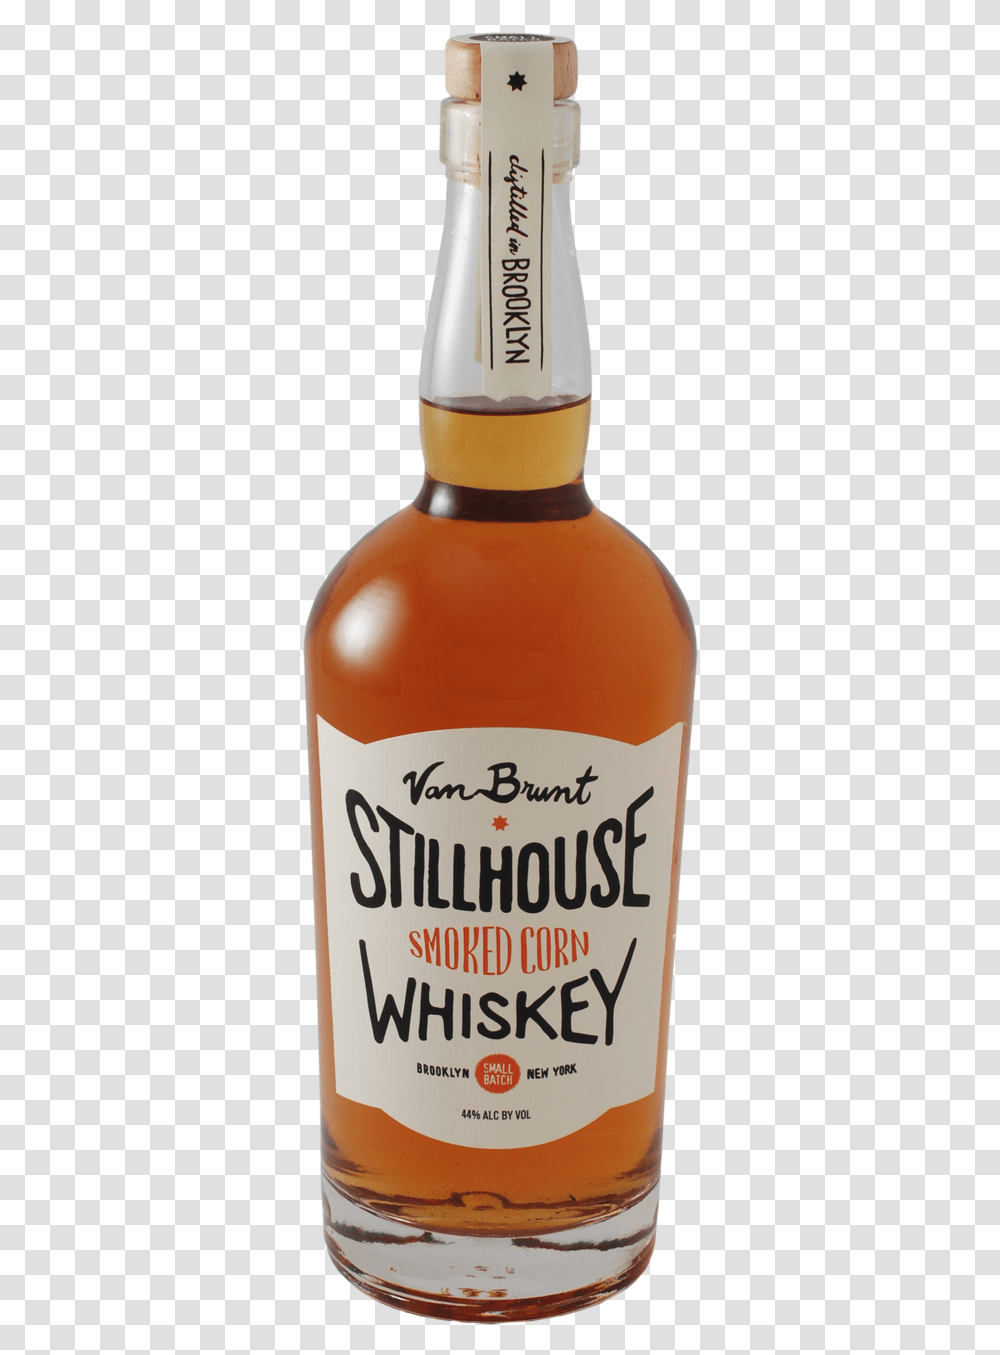 Vbs Smoked Corn Whiskey Is As American As It Gets Privateer Navy Yard Rum, Beer, Alcohol, Beverage, Drink Transparent Png